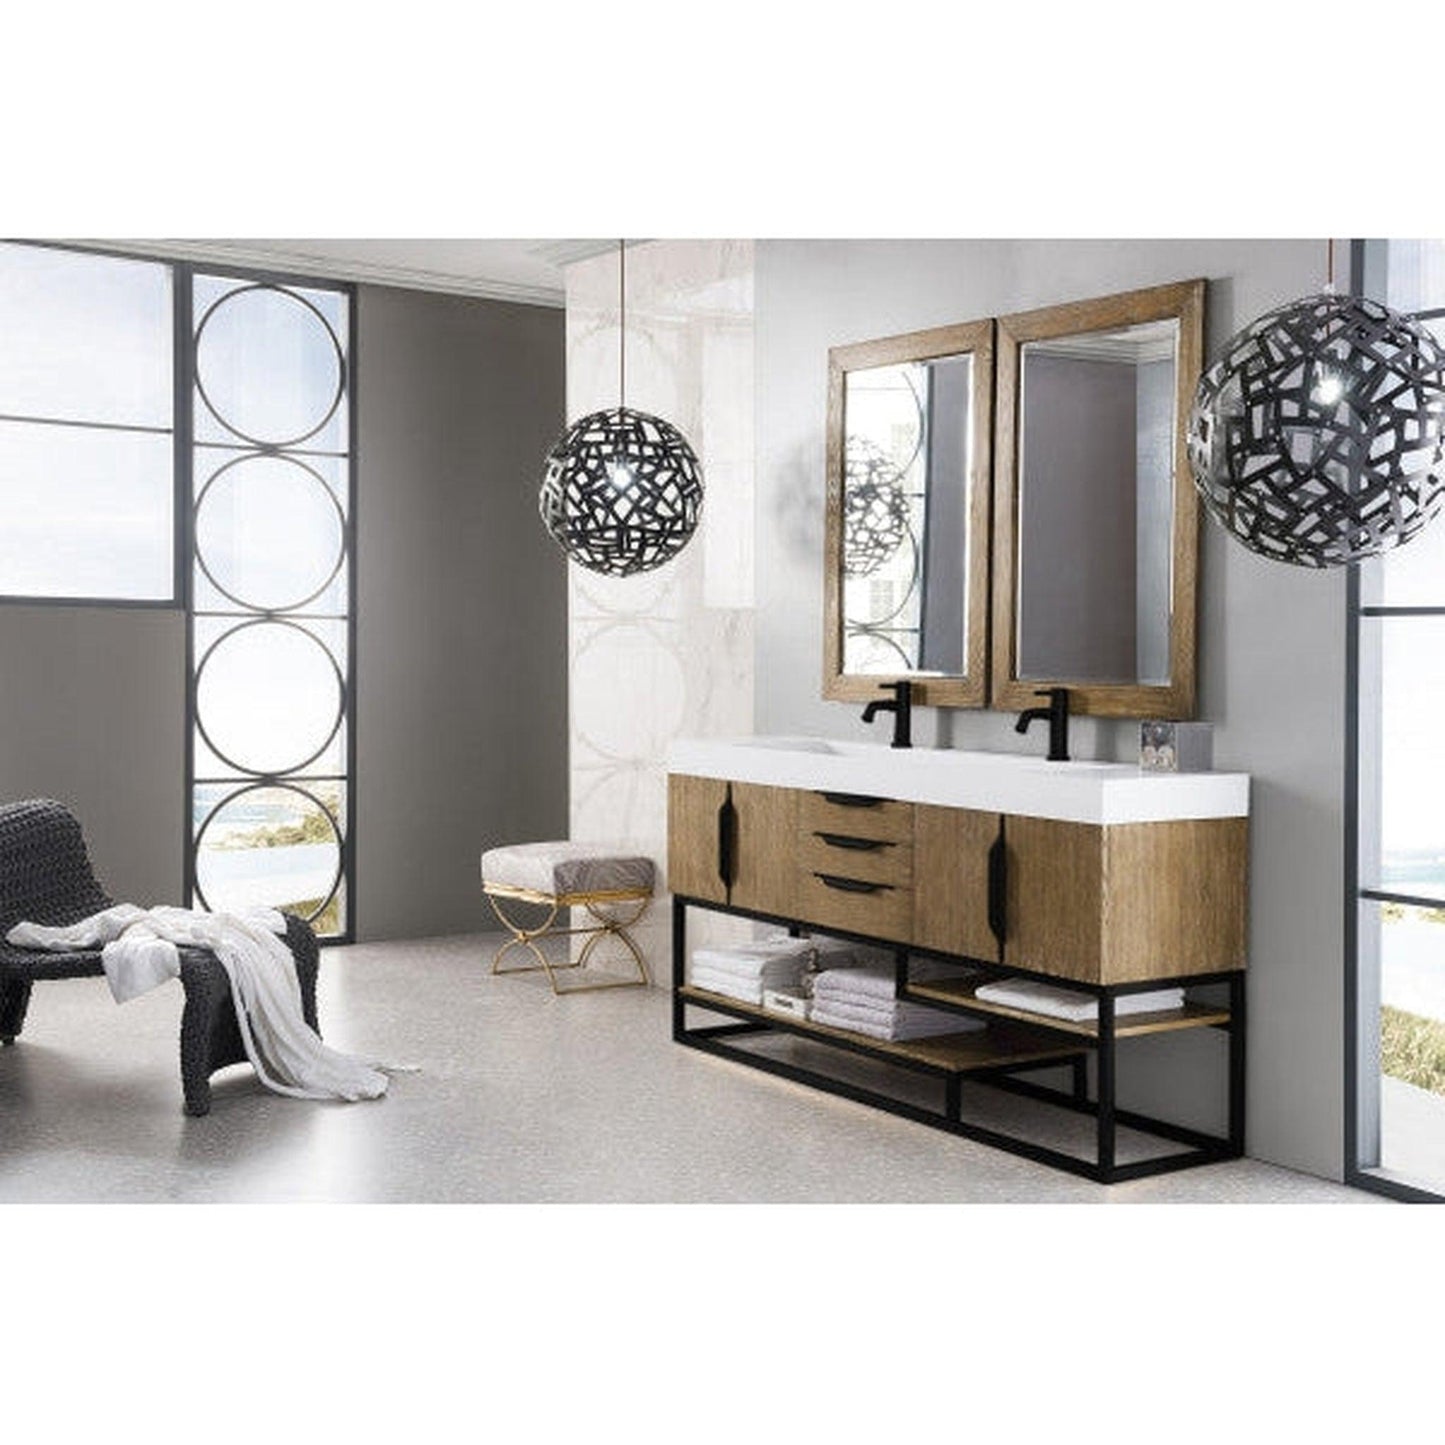 James Martin Columbia 73" Double Latte Oak Bathroom Vanity With Matte Black Hardware and 6" Glossy White Composite Countertop